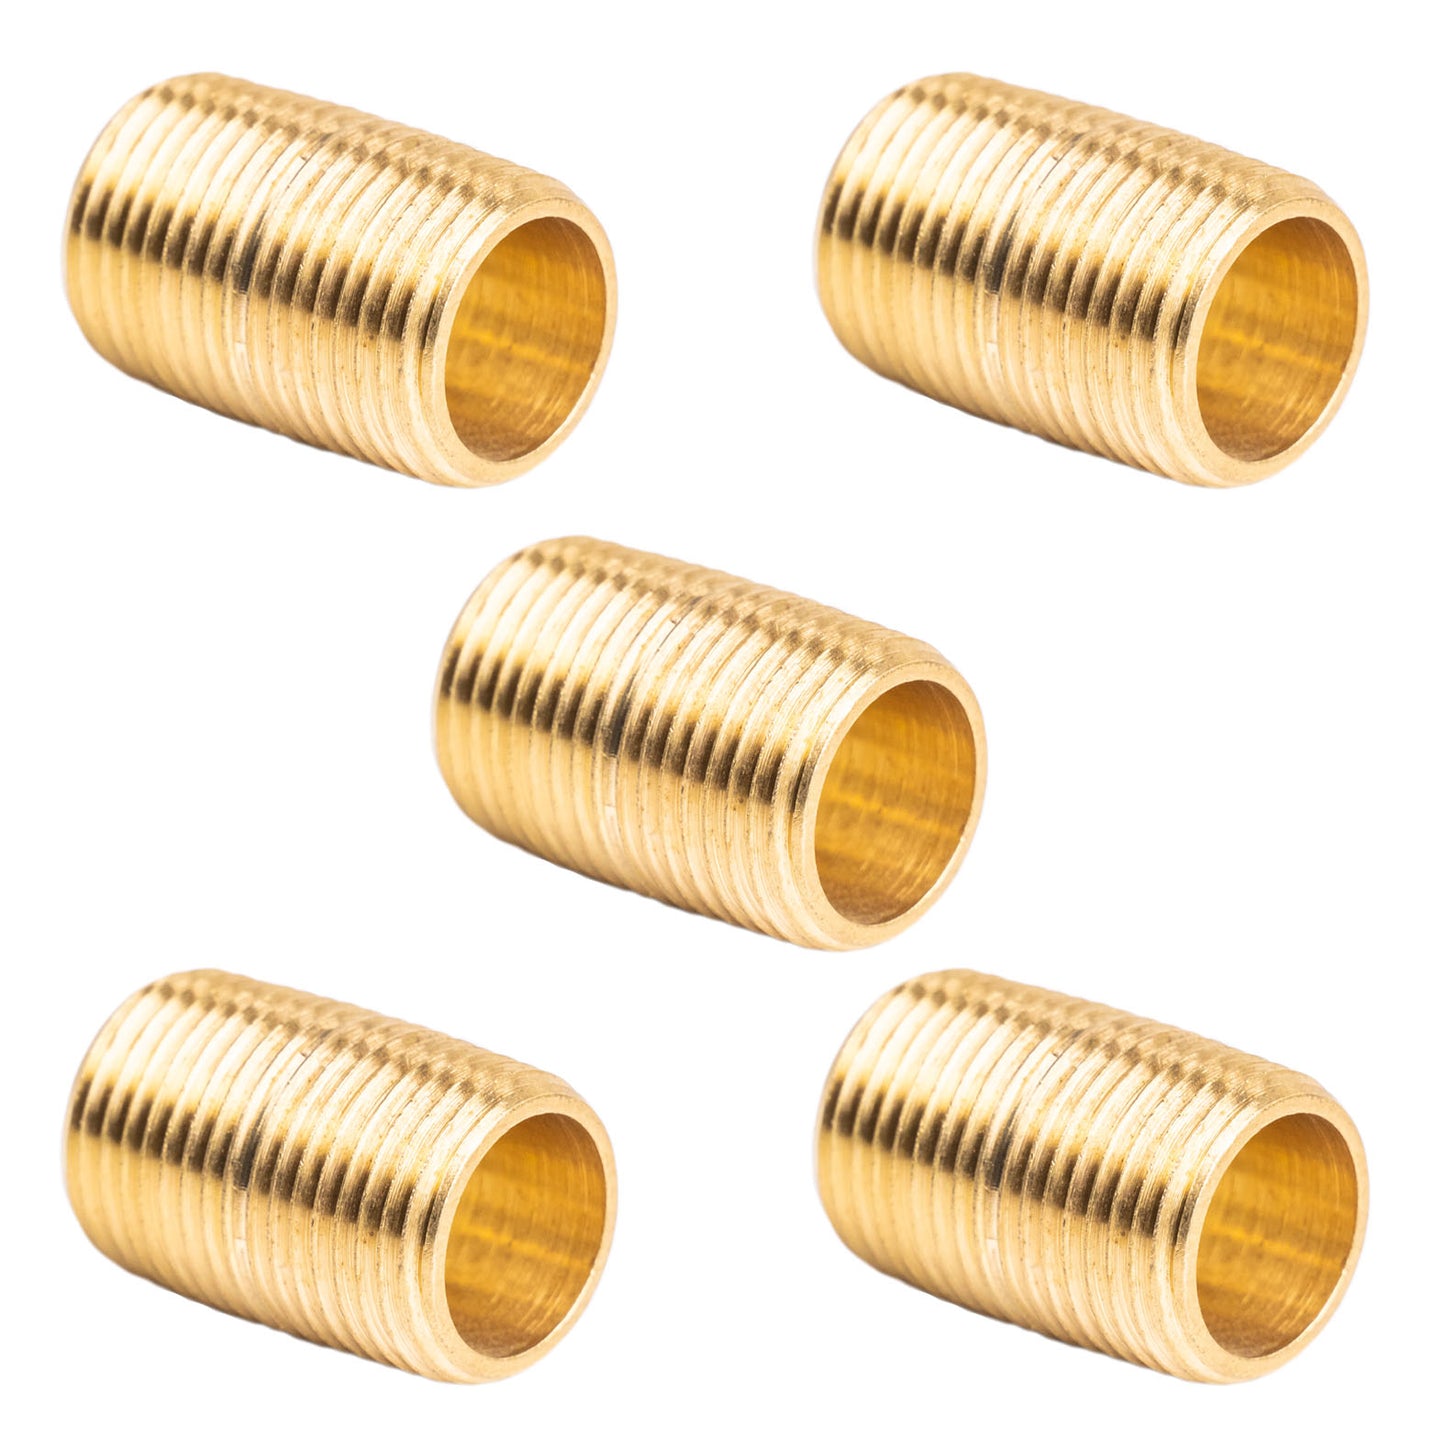 1/4" NPT X Male Close Pipe Nipples Threaded Brass Fitting Pipe Connectors 5 Pack